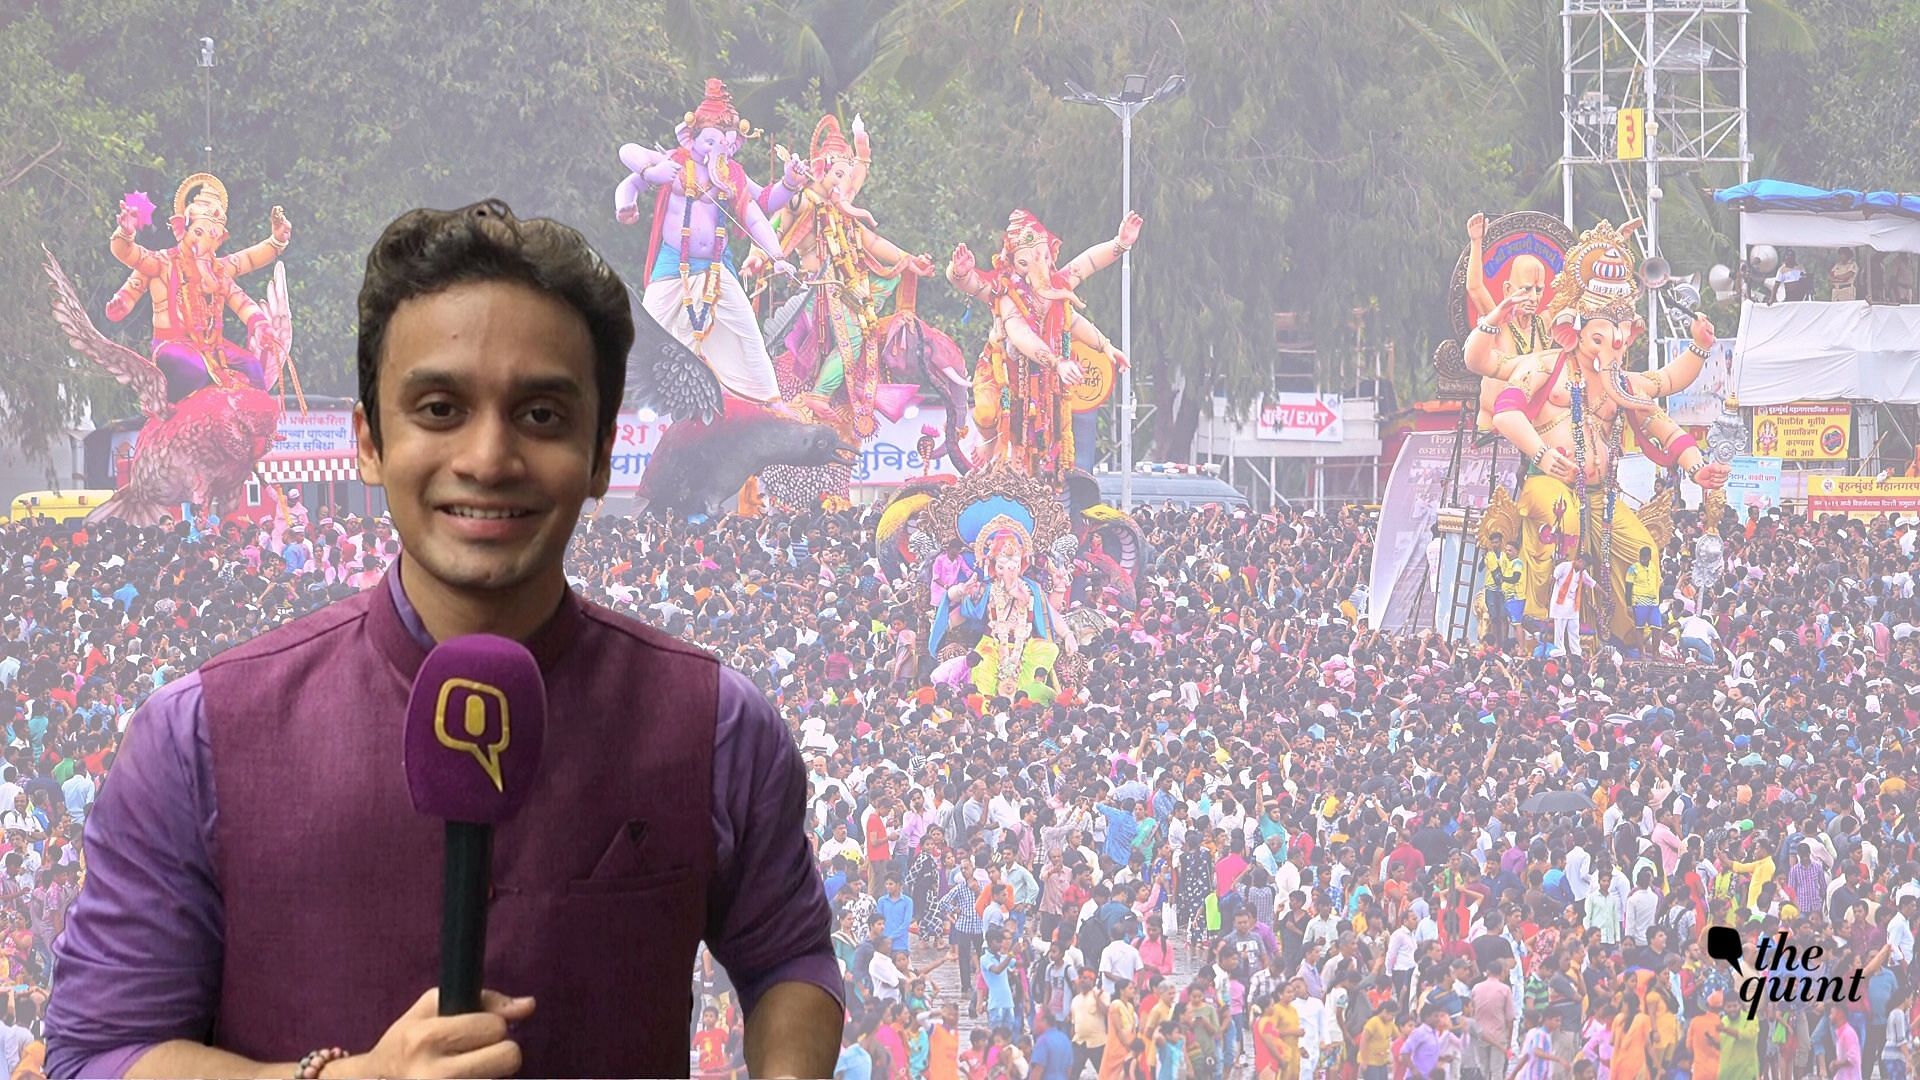 The Quint asks Mumbaikars the one wish they would seek of Lord Ganesha for the upcoming elections in Maharashtra.